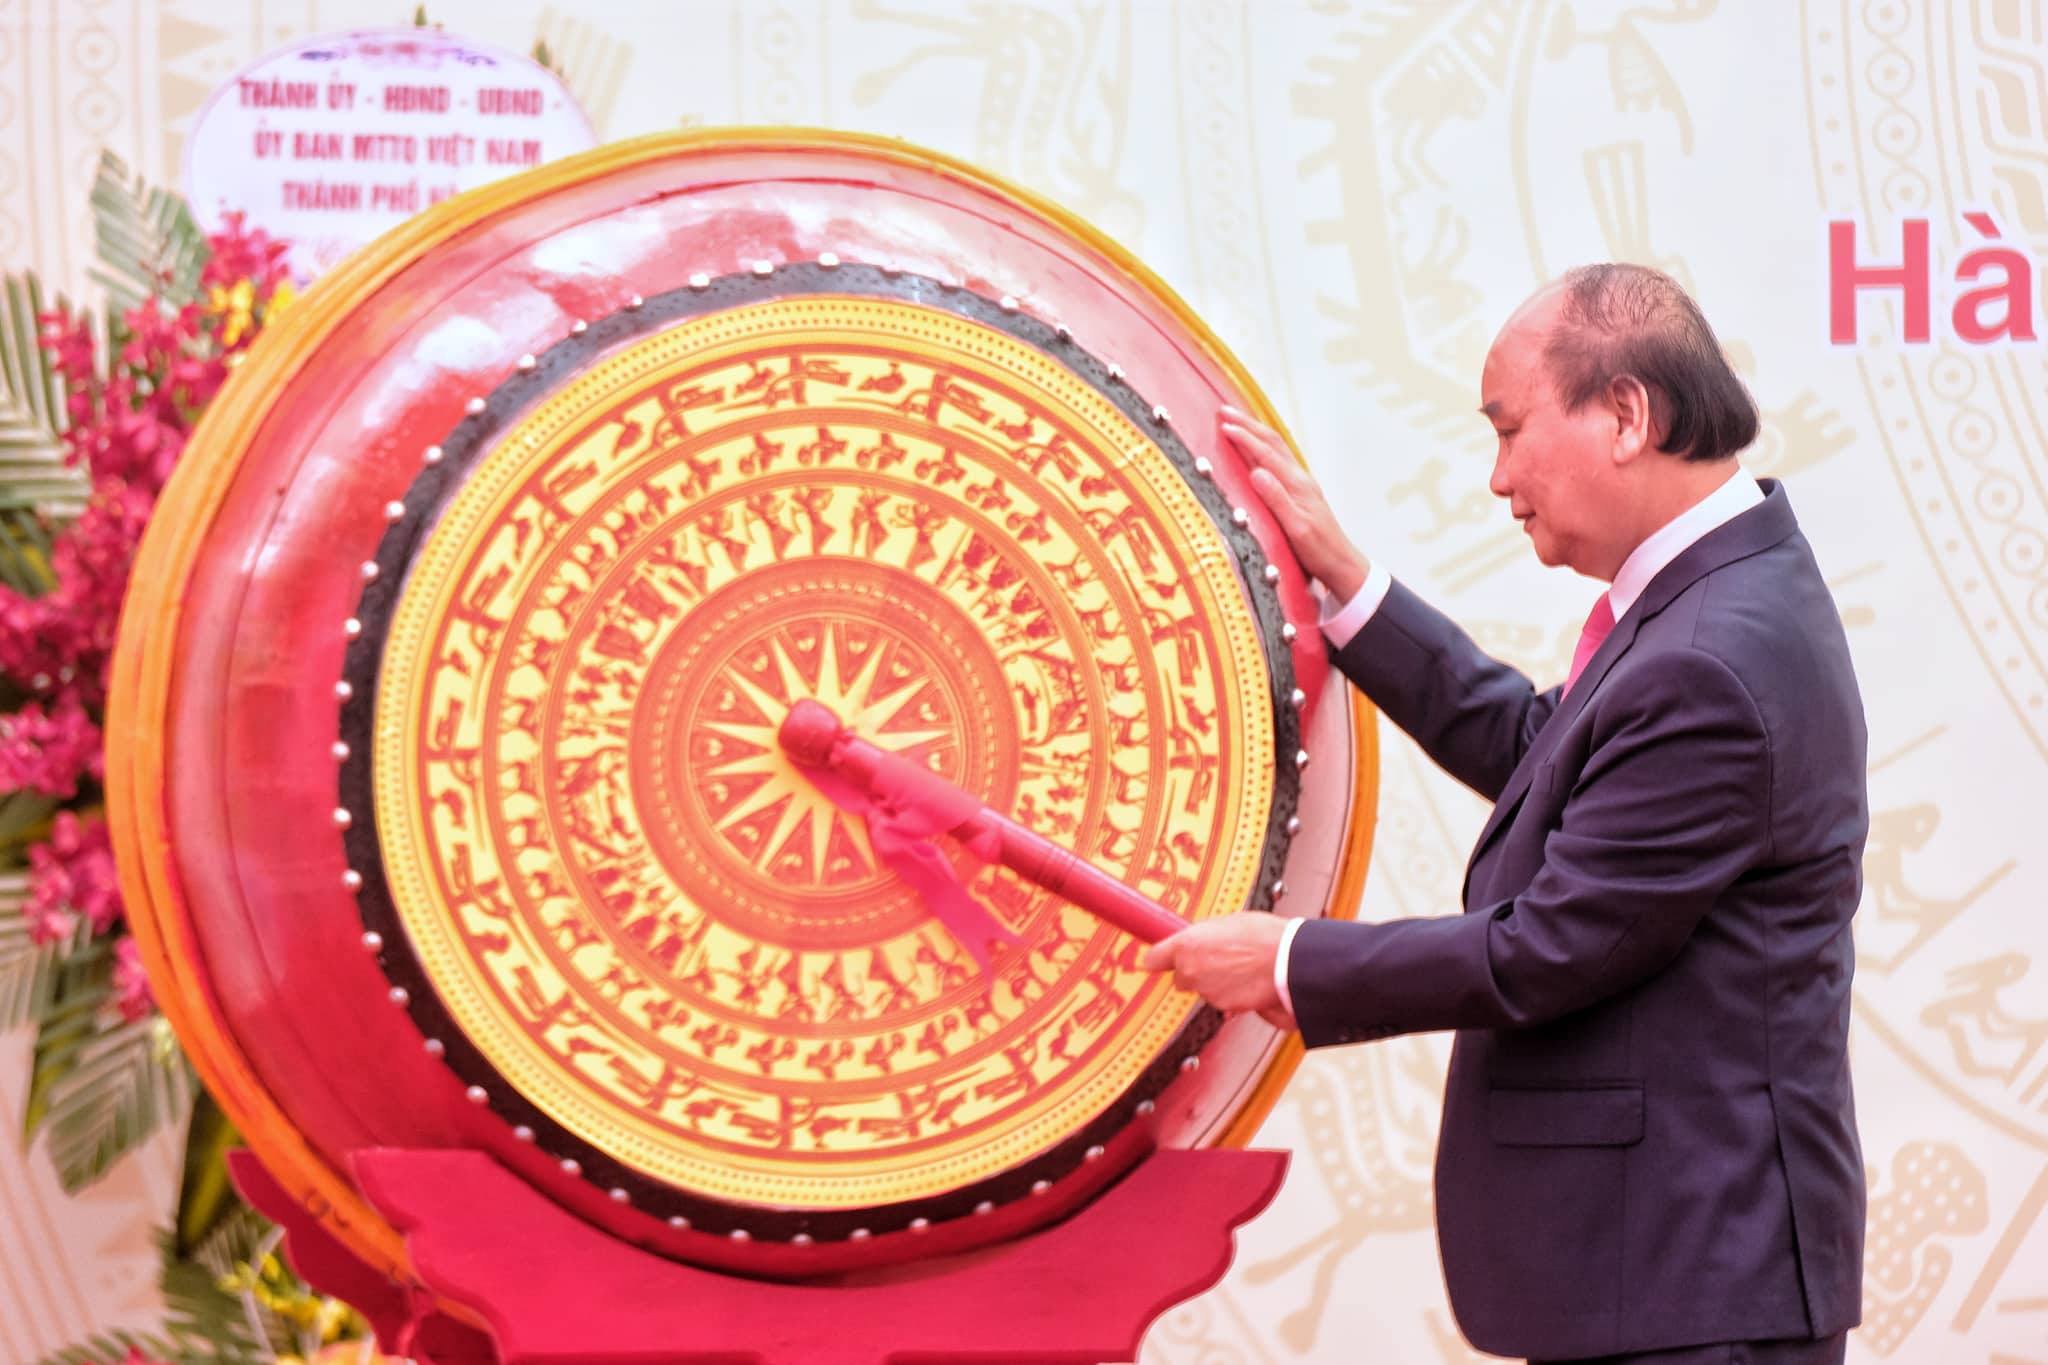 State President Nguyen Xuan Phuc hits a drum during the school opening ceremony at HUS High School for Gifted Students in Hanoi, September 5, 2022. Photo: Nam Tran / Tuoi Tre